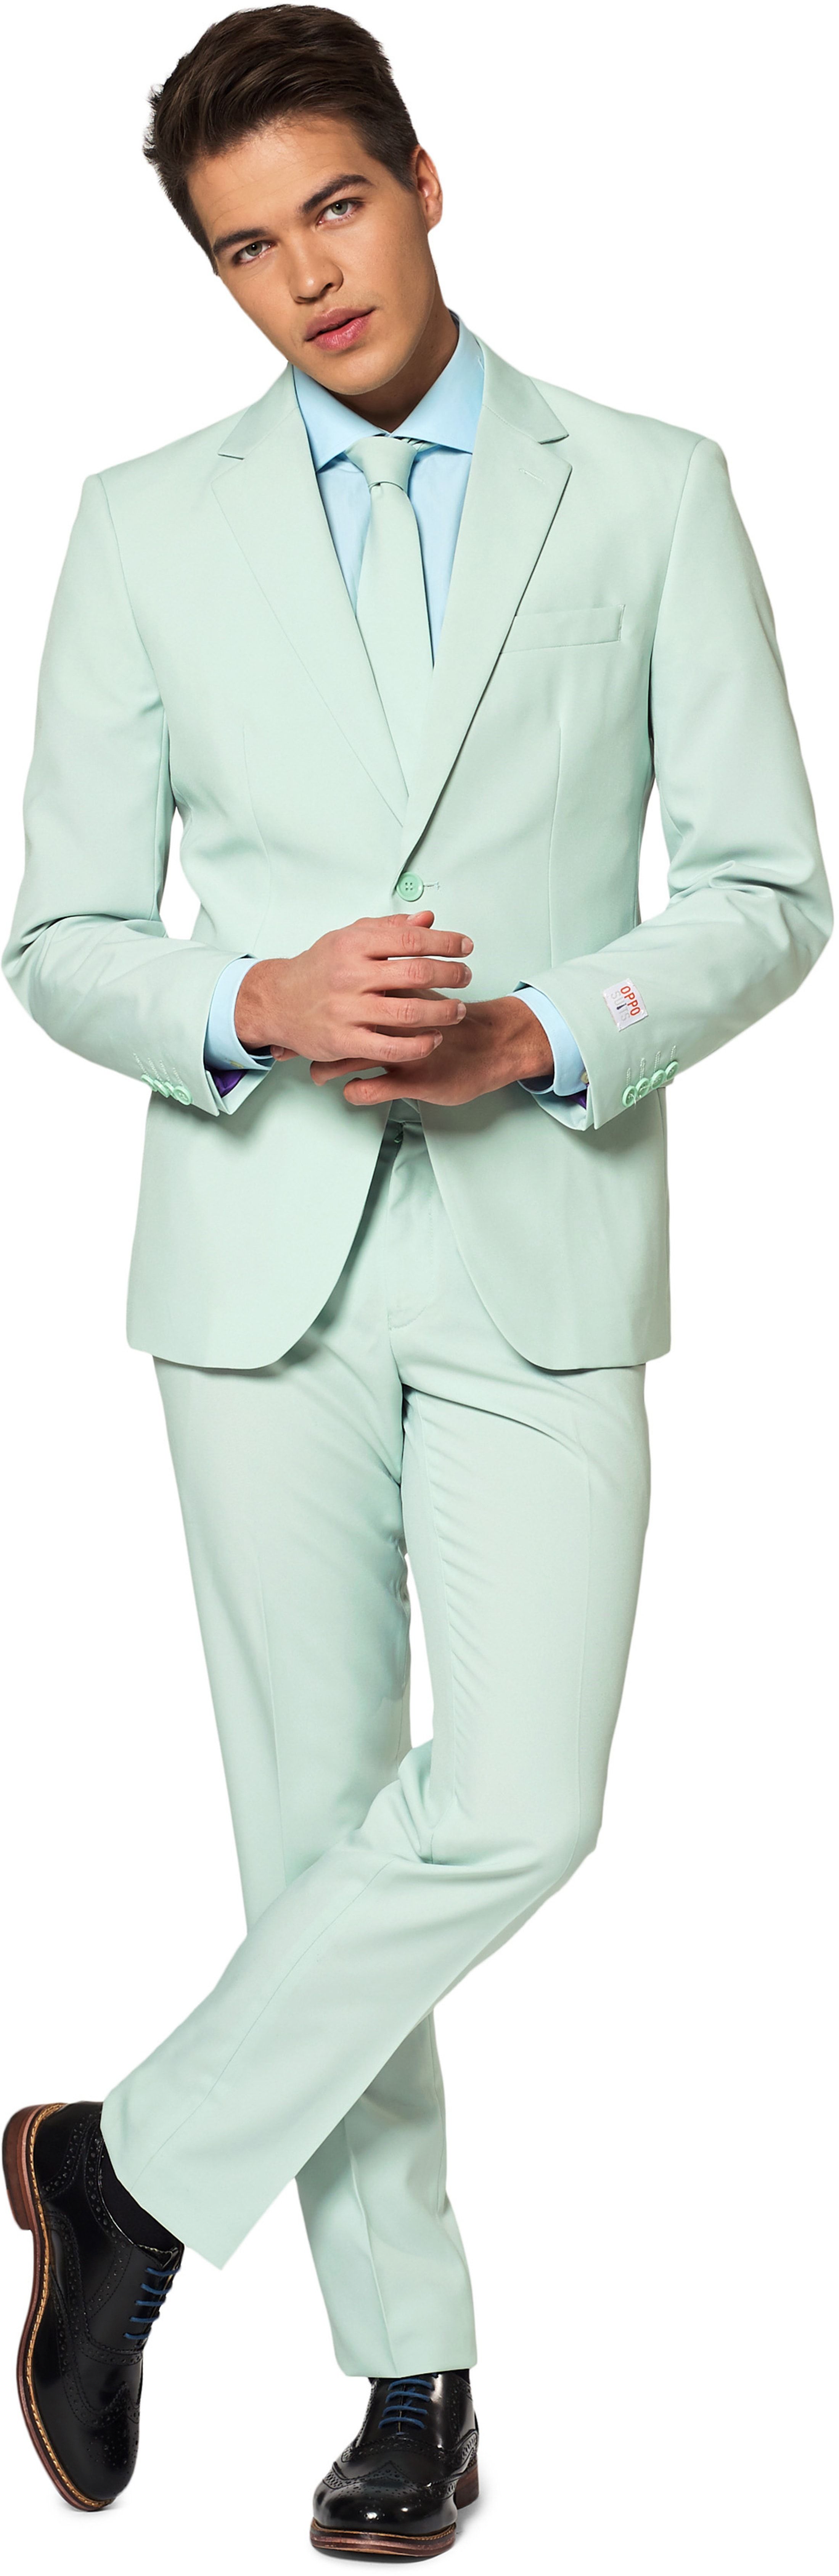 OppoSuits Costume Menthe Magique Vert taille 54